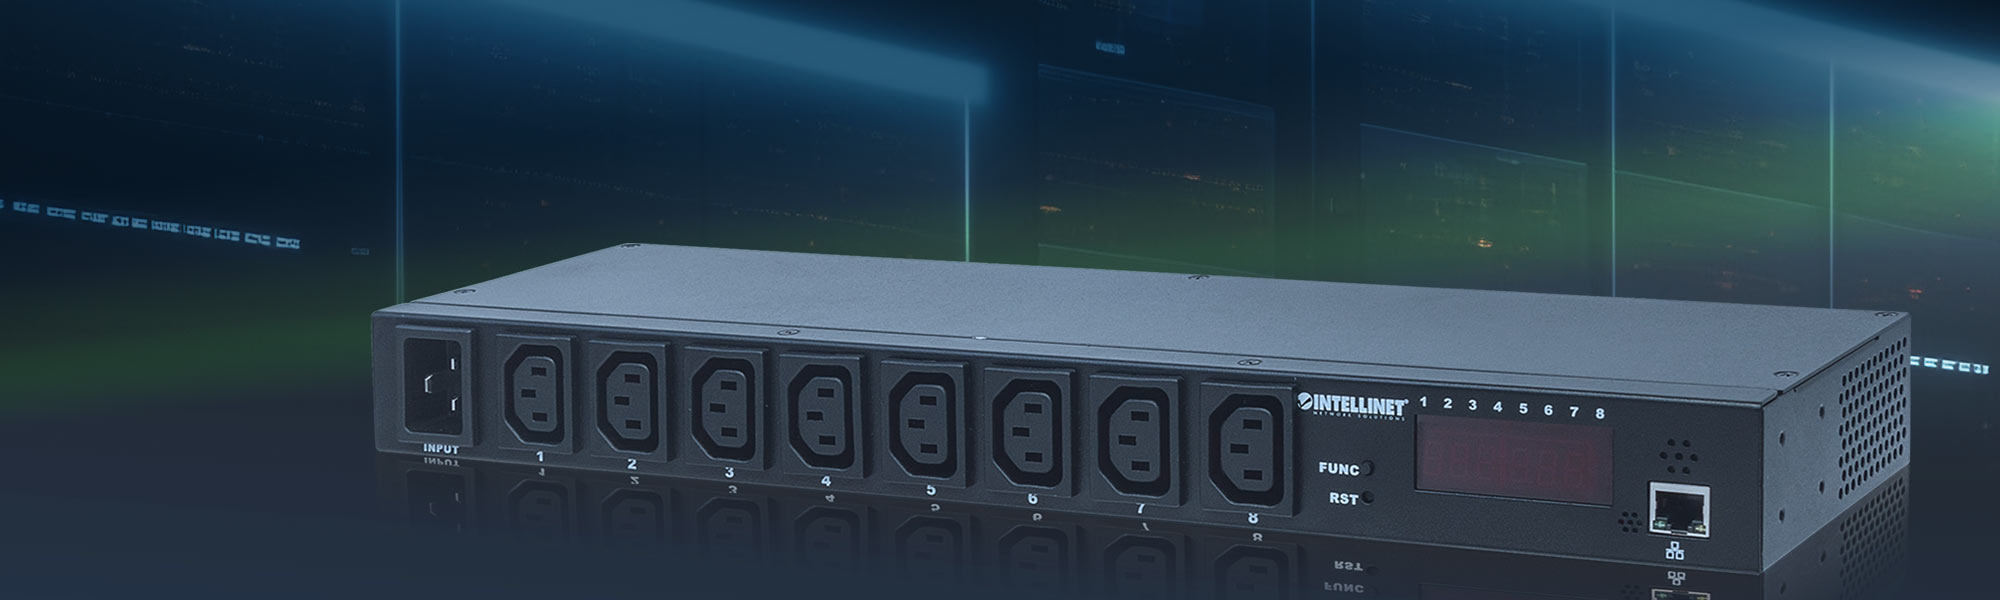 View more information about the Intellinet 19" Rackmount Smart Switched Metered 8-Outlet PDU